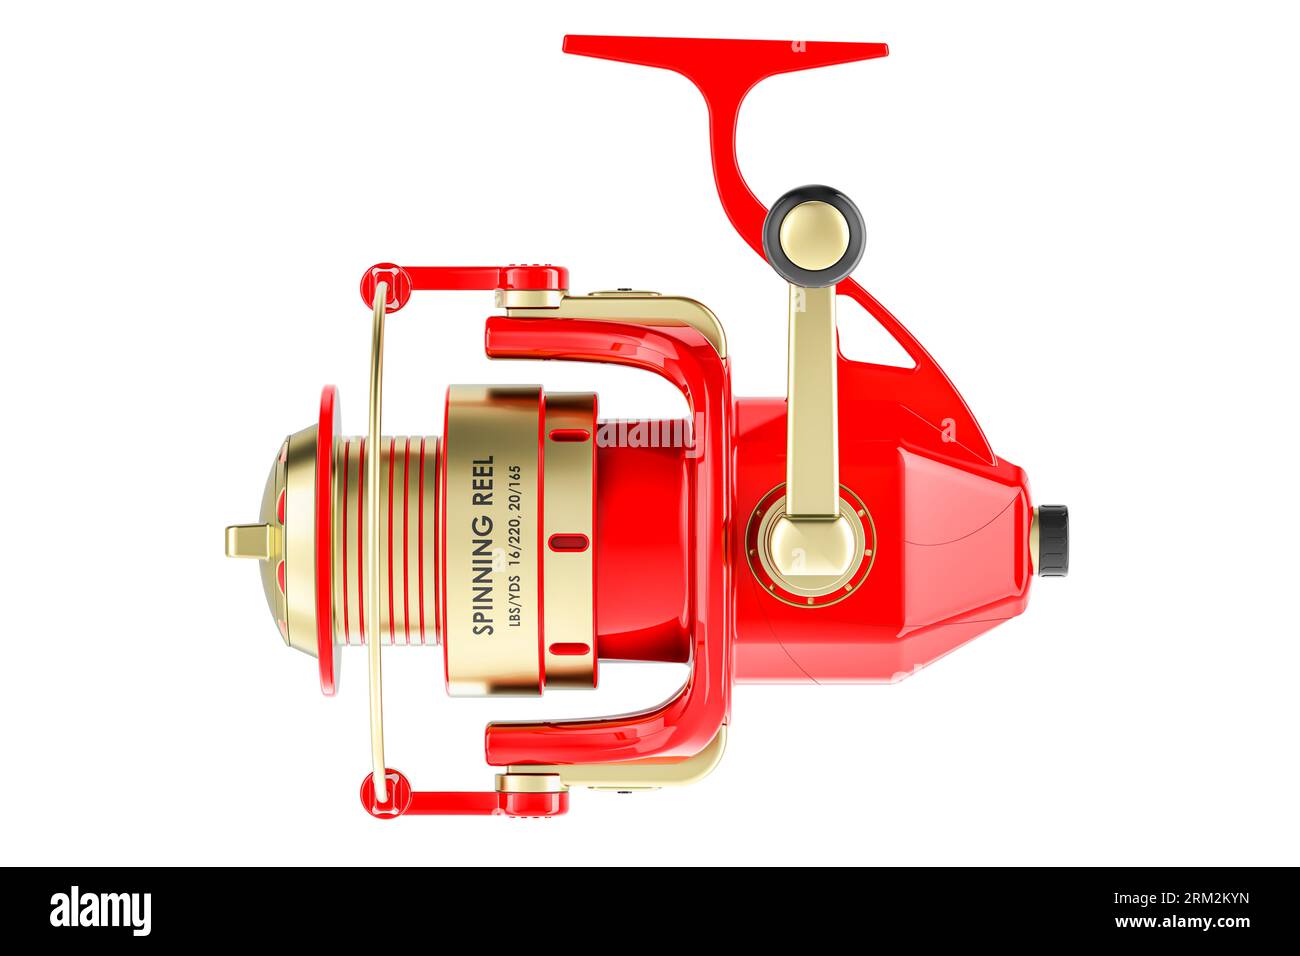 https://c8.alamy.com/comp/2RM2KYN/red-spinning-reel-side-view-3d-rendering-isolated-on-white-background-2RM2KYN.jpg